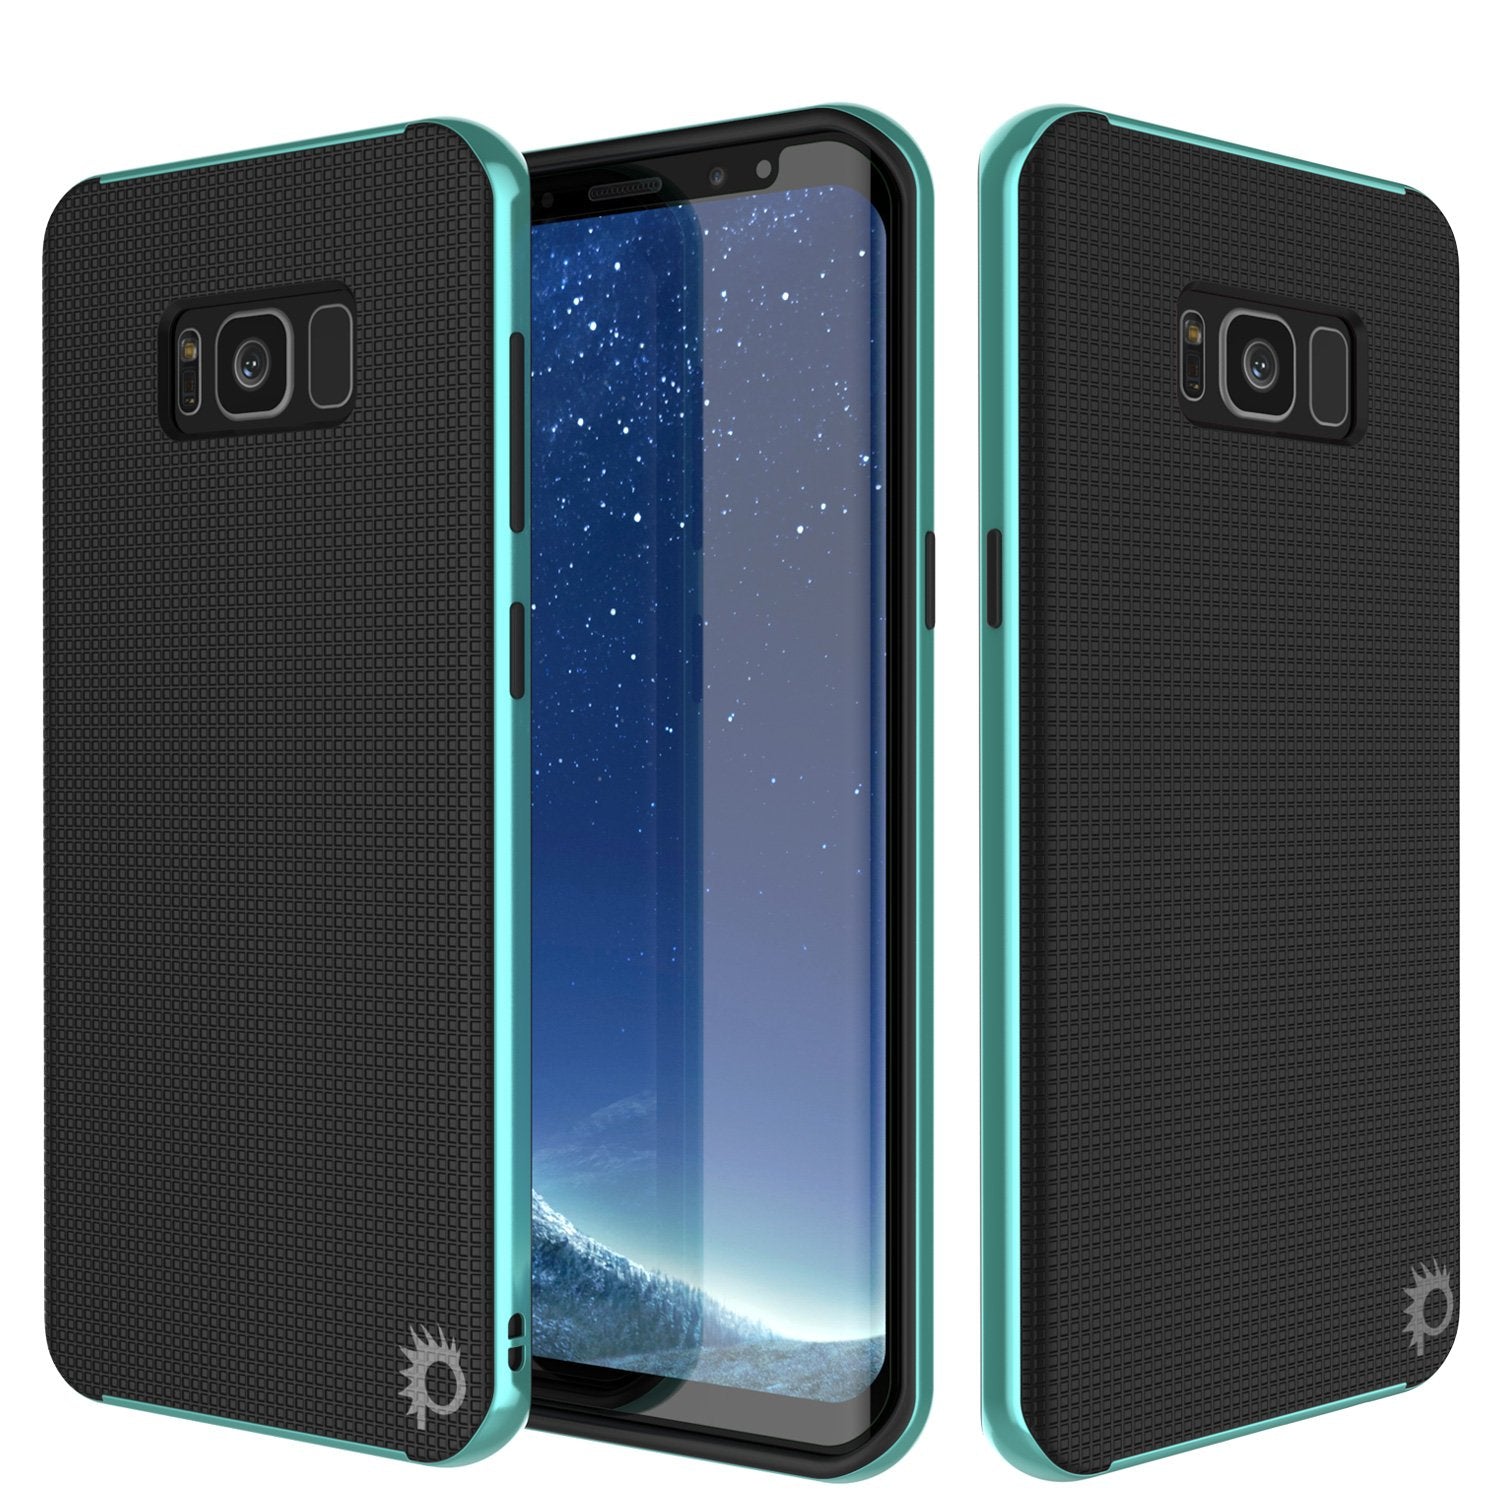 Galaxy S8 Case, PunkCase [Stealth Series] Hybrid 3-Piece Shockproof Dual Layer Cover [Non-Slip] [Soft TPU + PC Bumper] with PUNKSHIELD Screen Protector for Samsung S8 Edge [Teal] (Color in image: Teal)